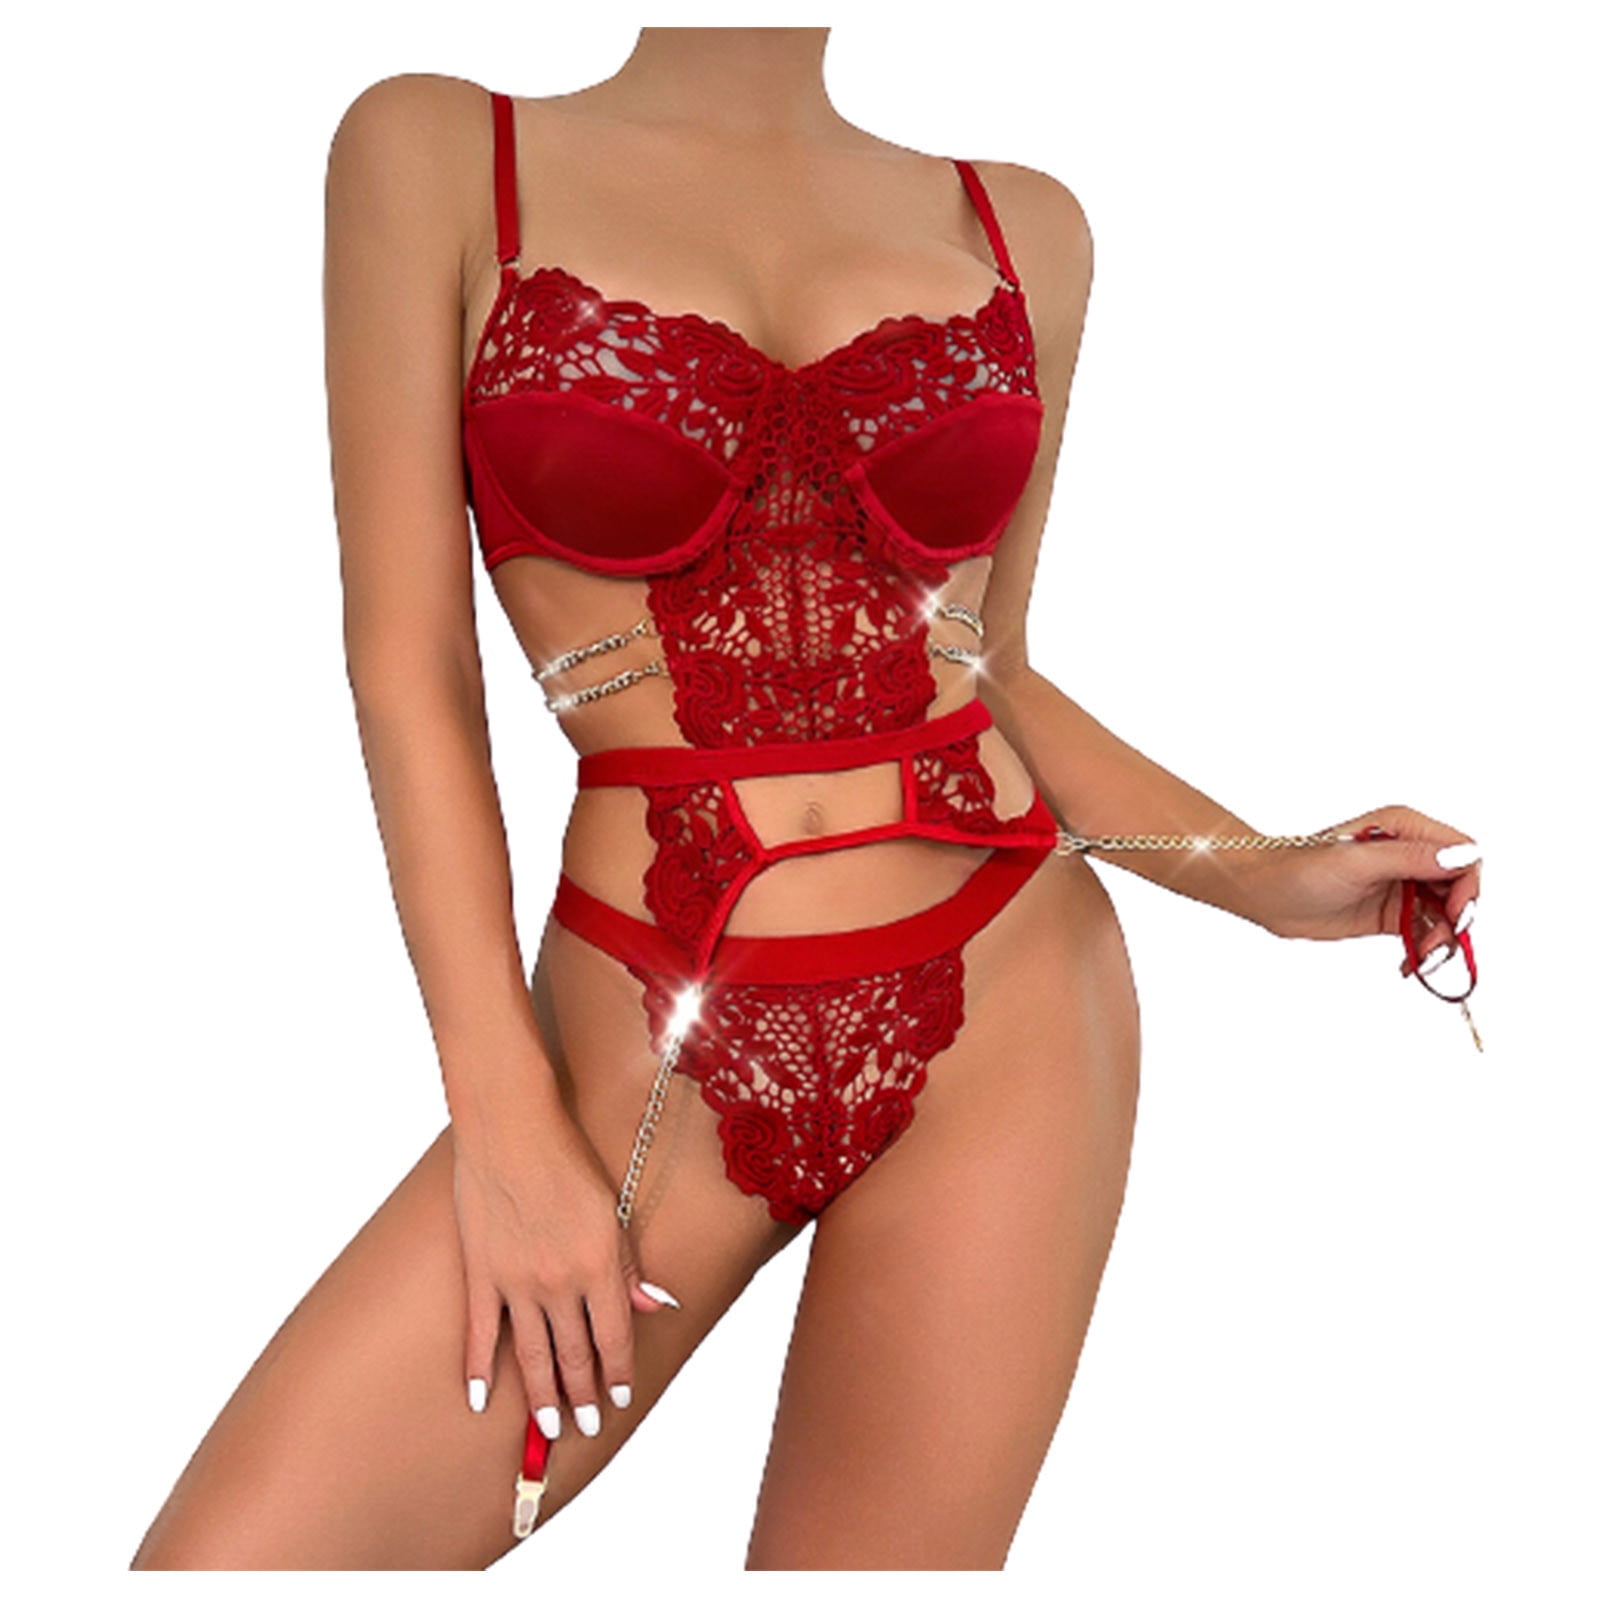 HAPIMO Sales Women's Lingerie Set Naughty Sheer Cozy Babydoll Bodysuit with  Garter Belts Hollow Out Nightwear Bandage Lingerie Red M